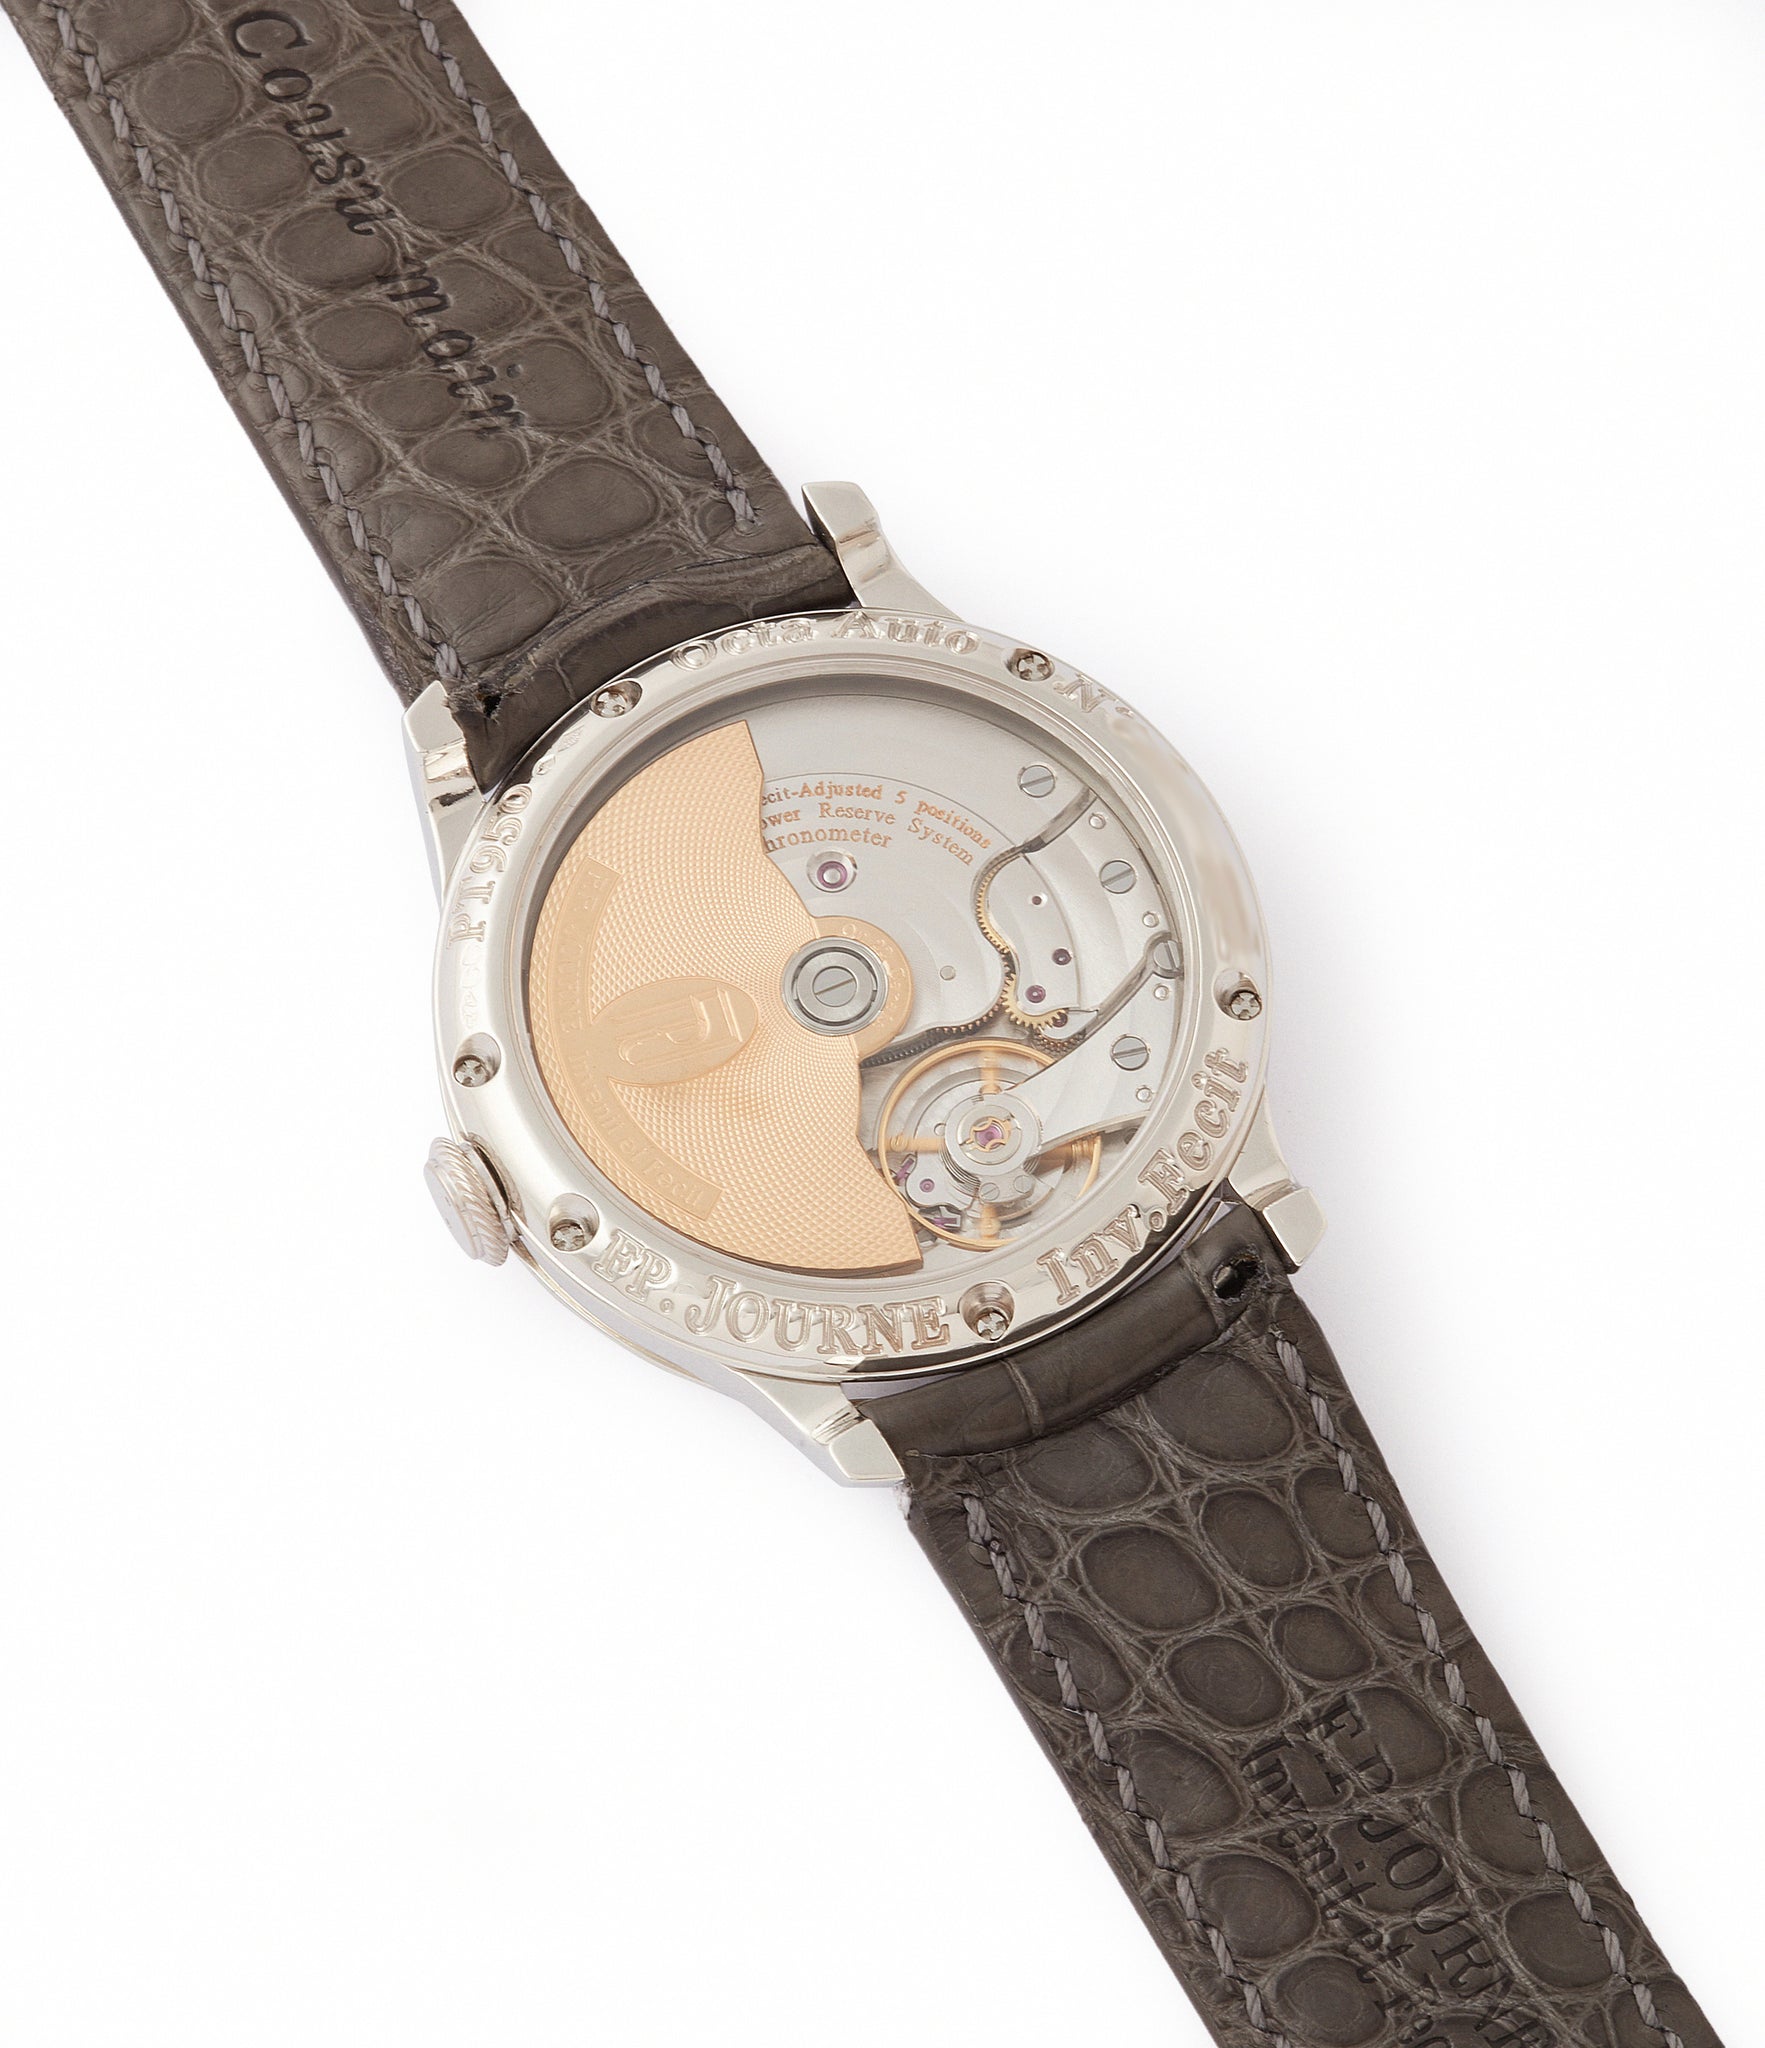 1300.3 calibre early brass movement F. P. Journe Octa Lune 061-03L platinum rare watch for sale online at A Collected Man London specialist of independent watchmakers